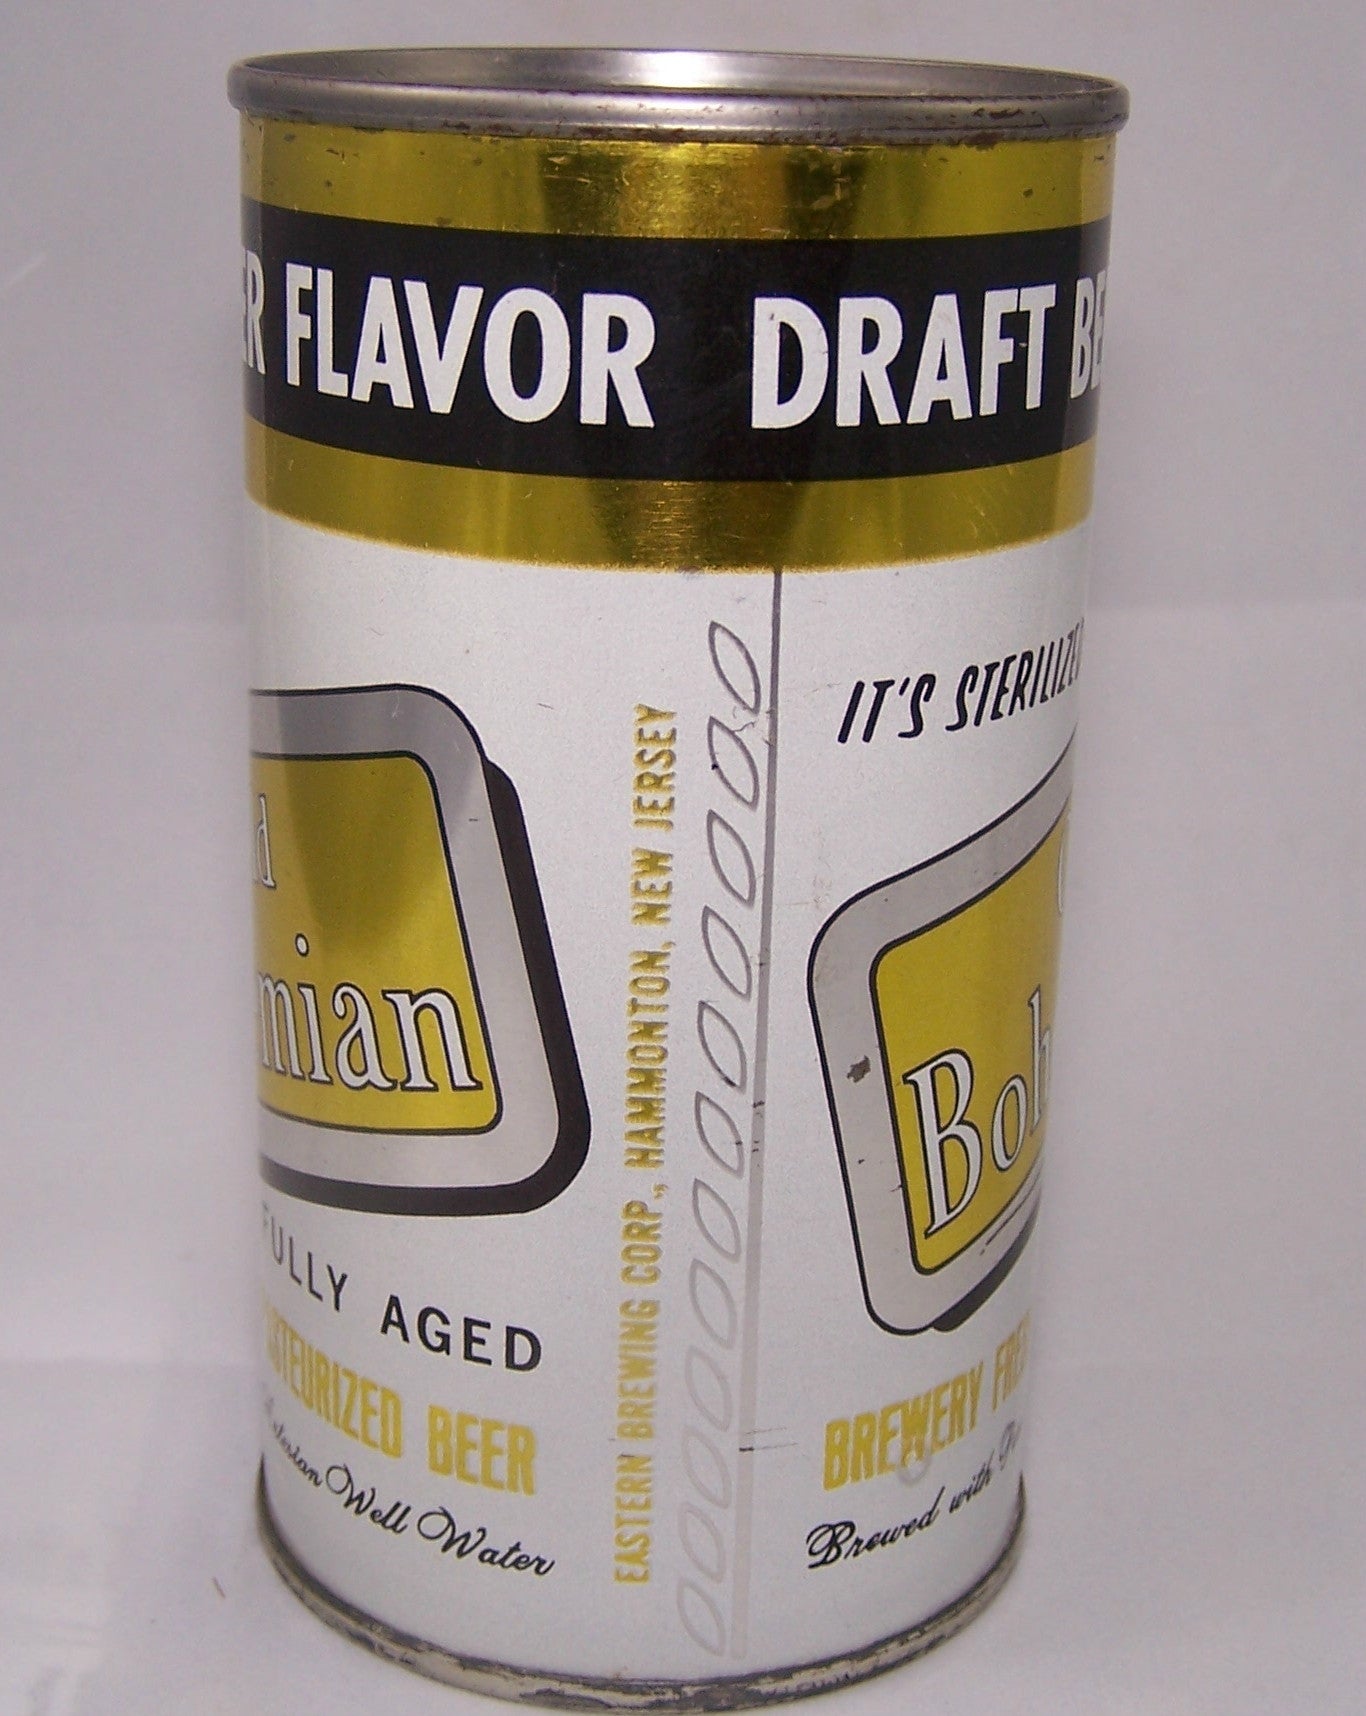 Old Bohemian Draft Beer Flavor, USBC 104-30, Grade 1 to 1/1+ Sold 4/10/15